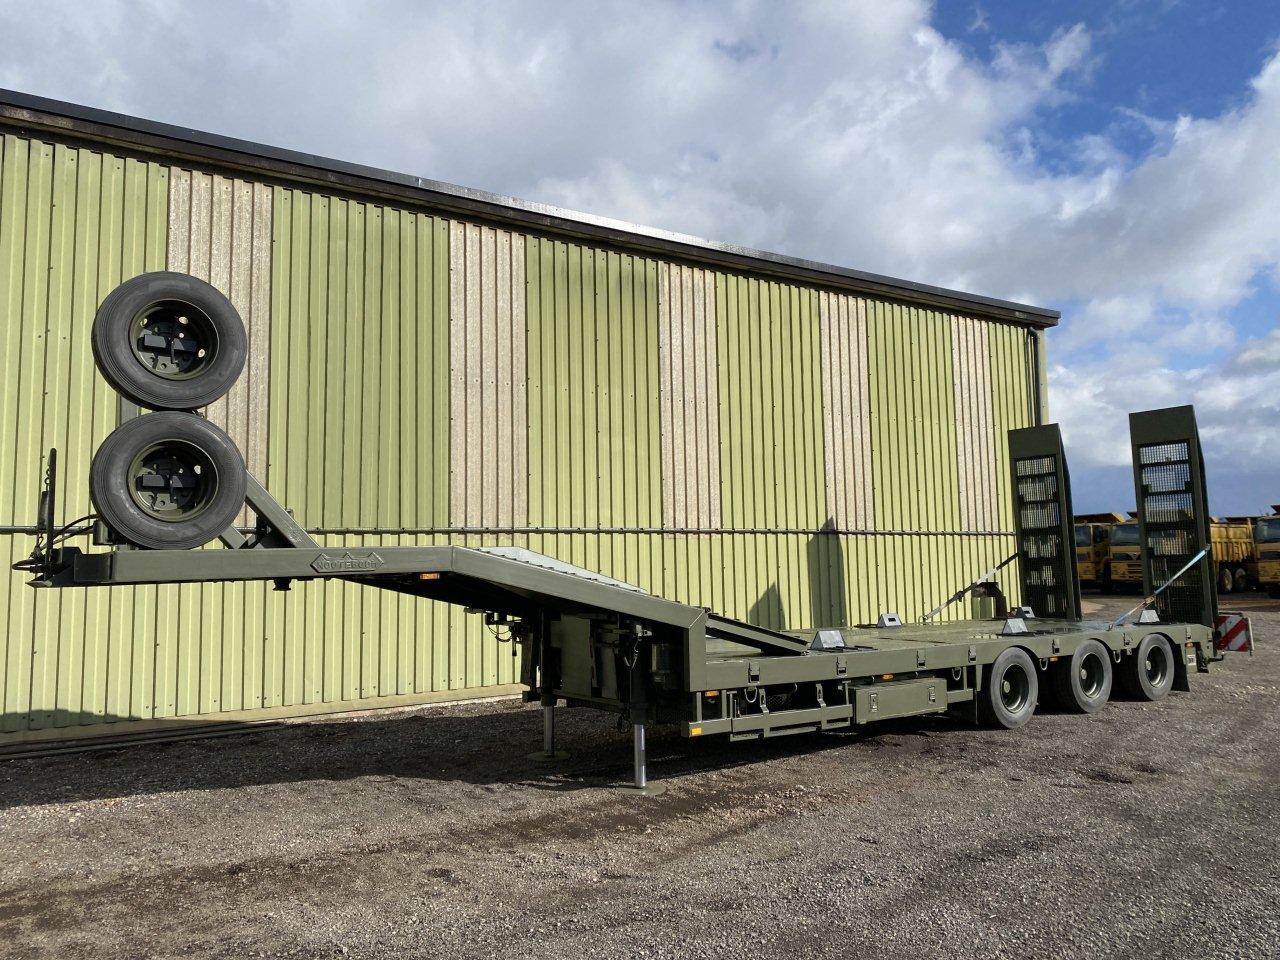 Nooteboom Semi Low Loader Trailer - Govsales of ex military vehicles for sale, mod surplus